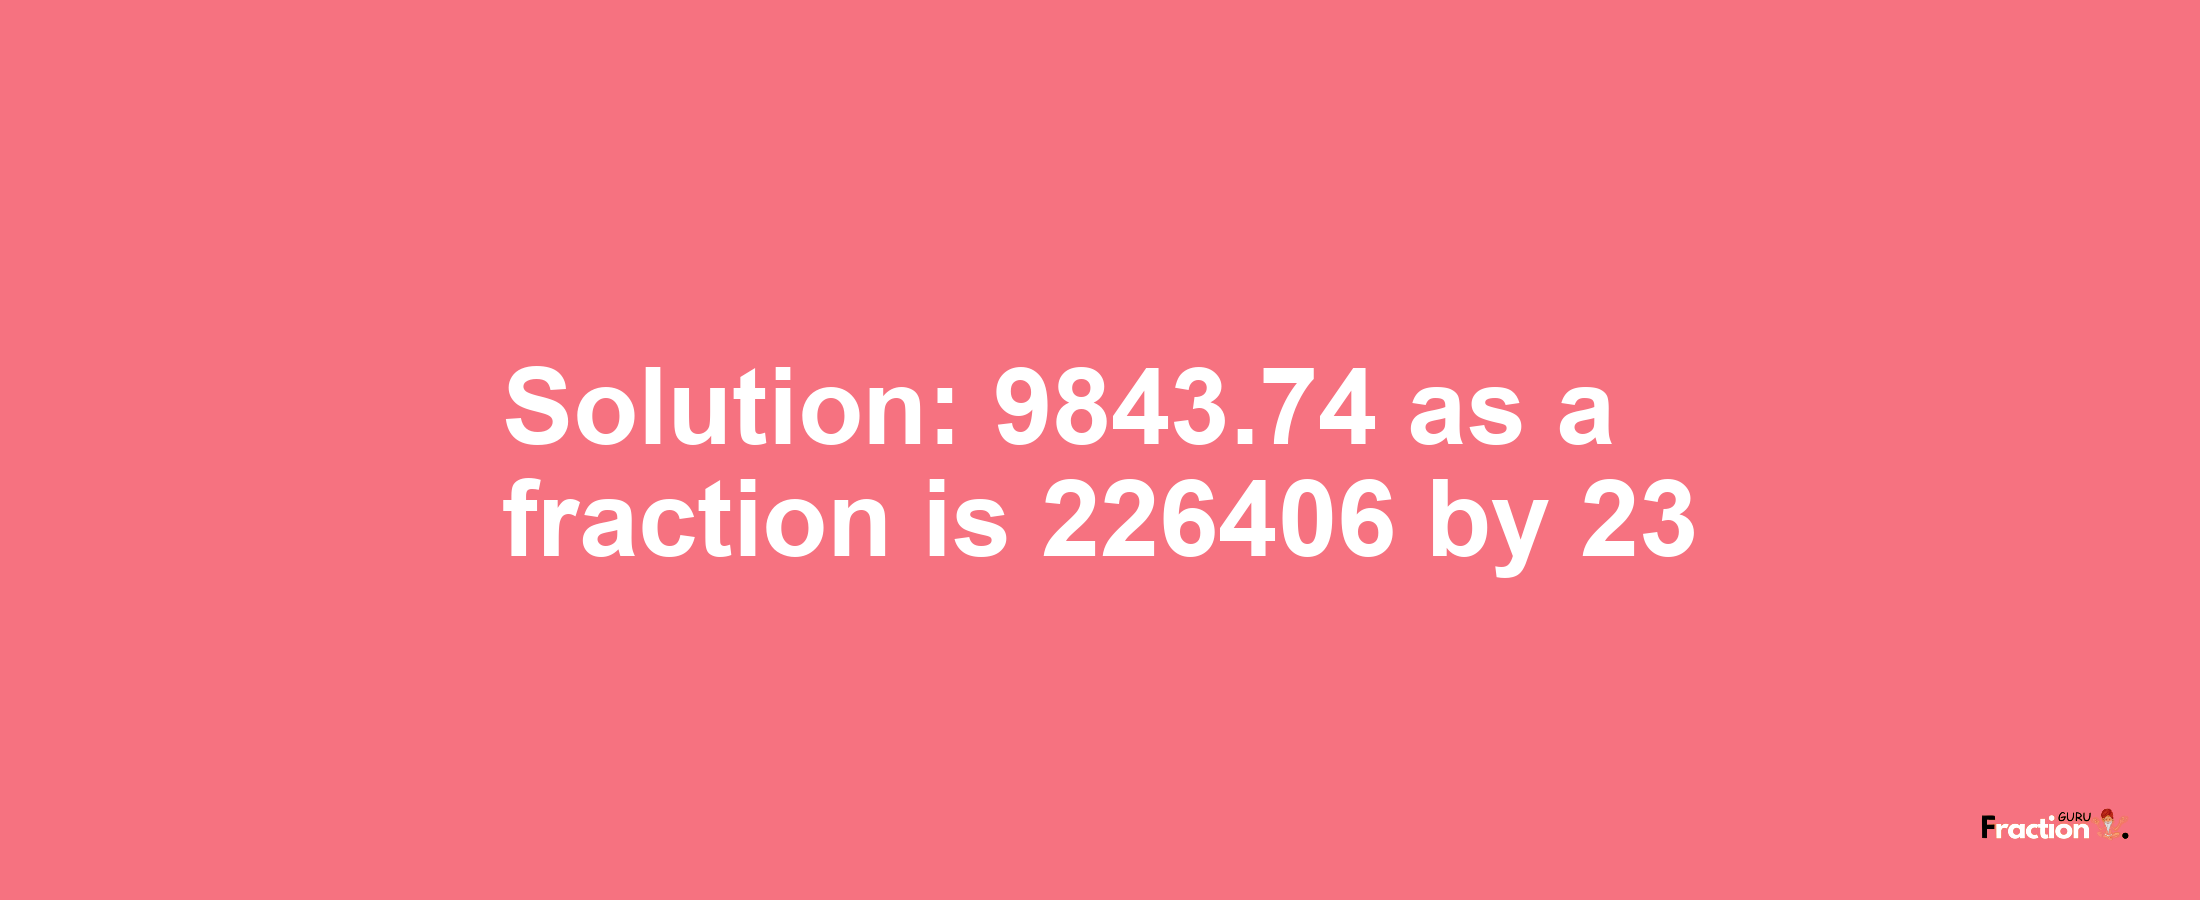 Solution:9843.74 as a fraction is 226406/23